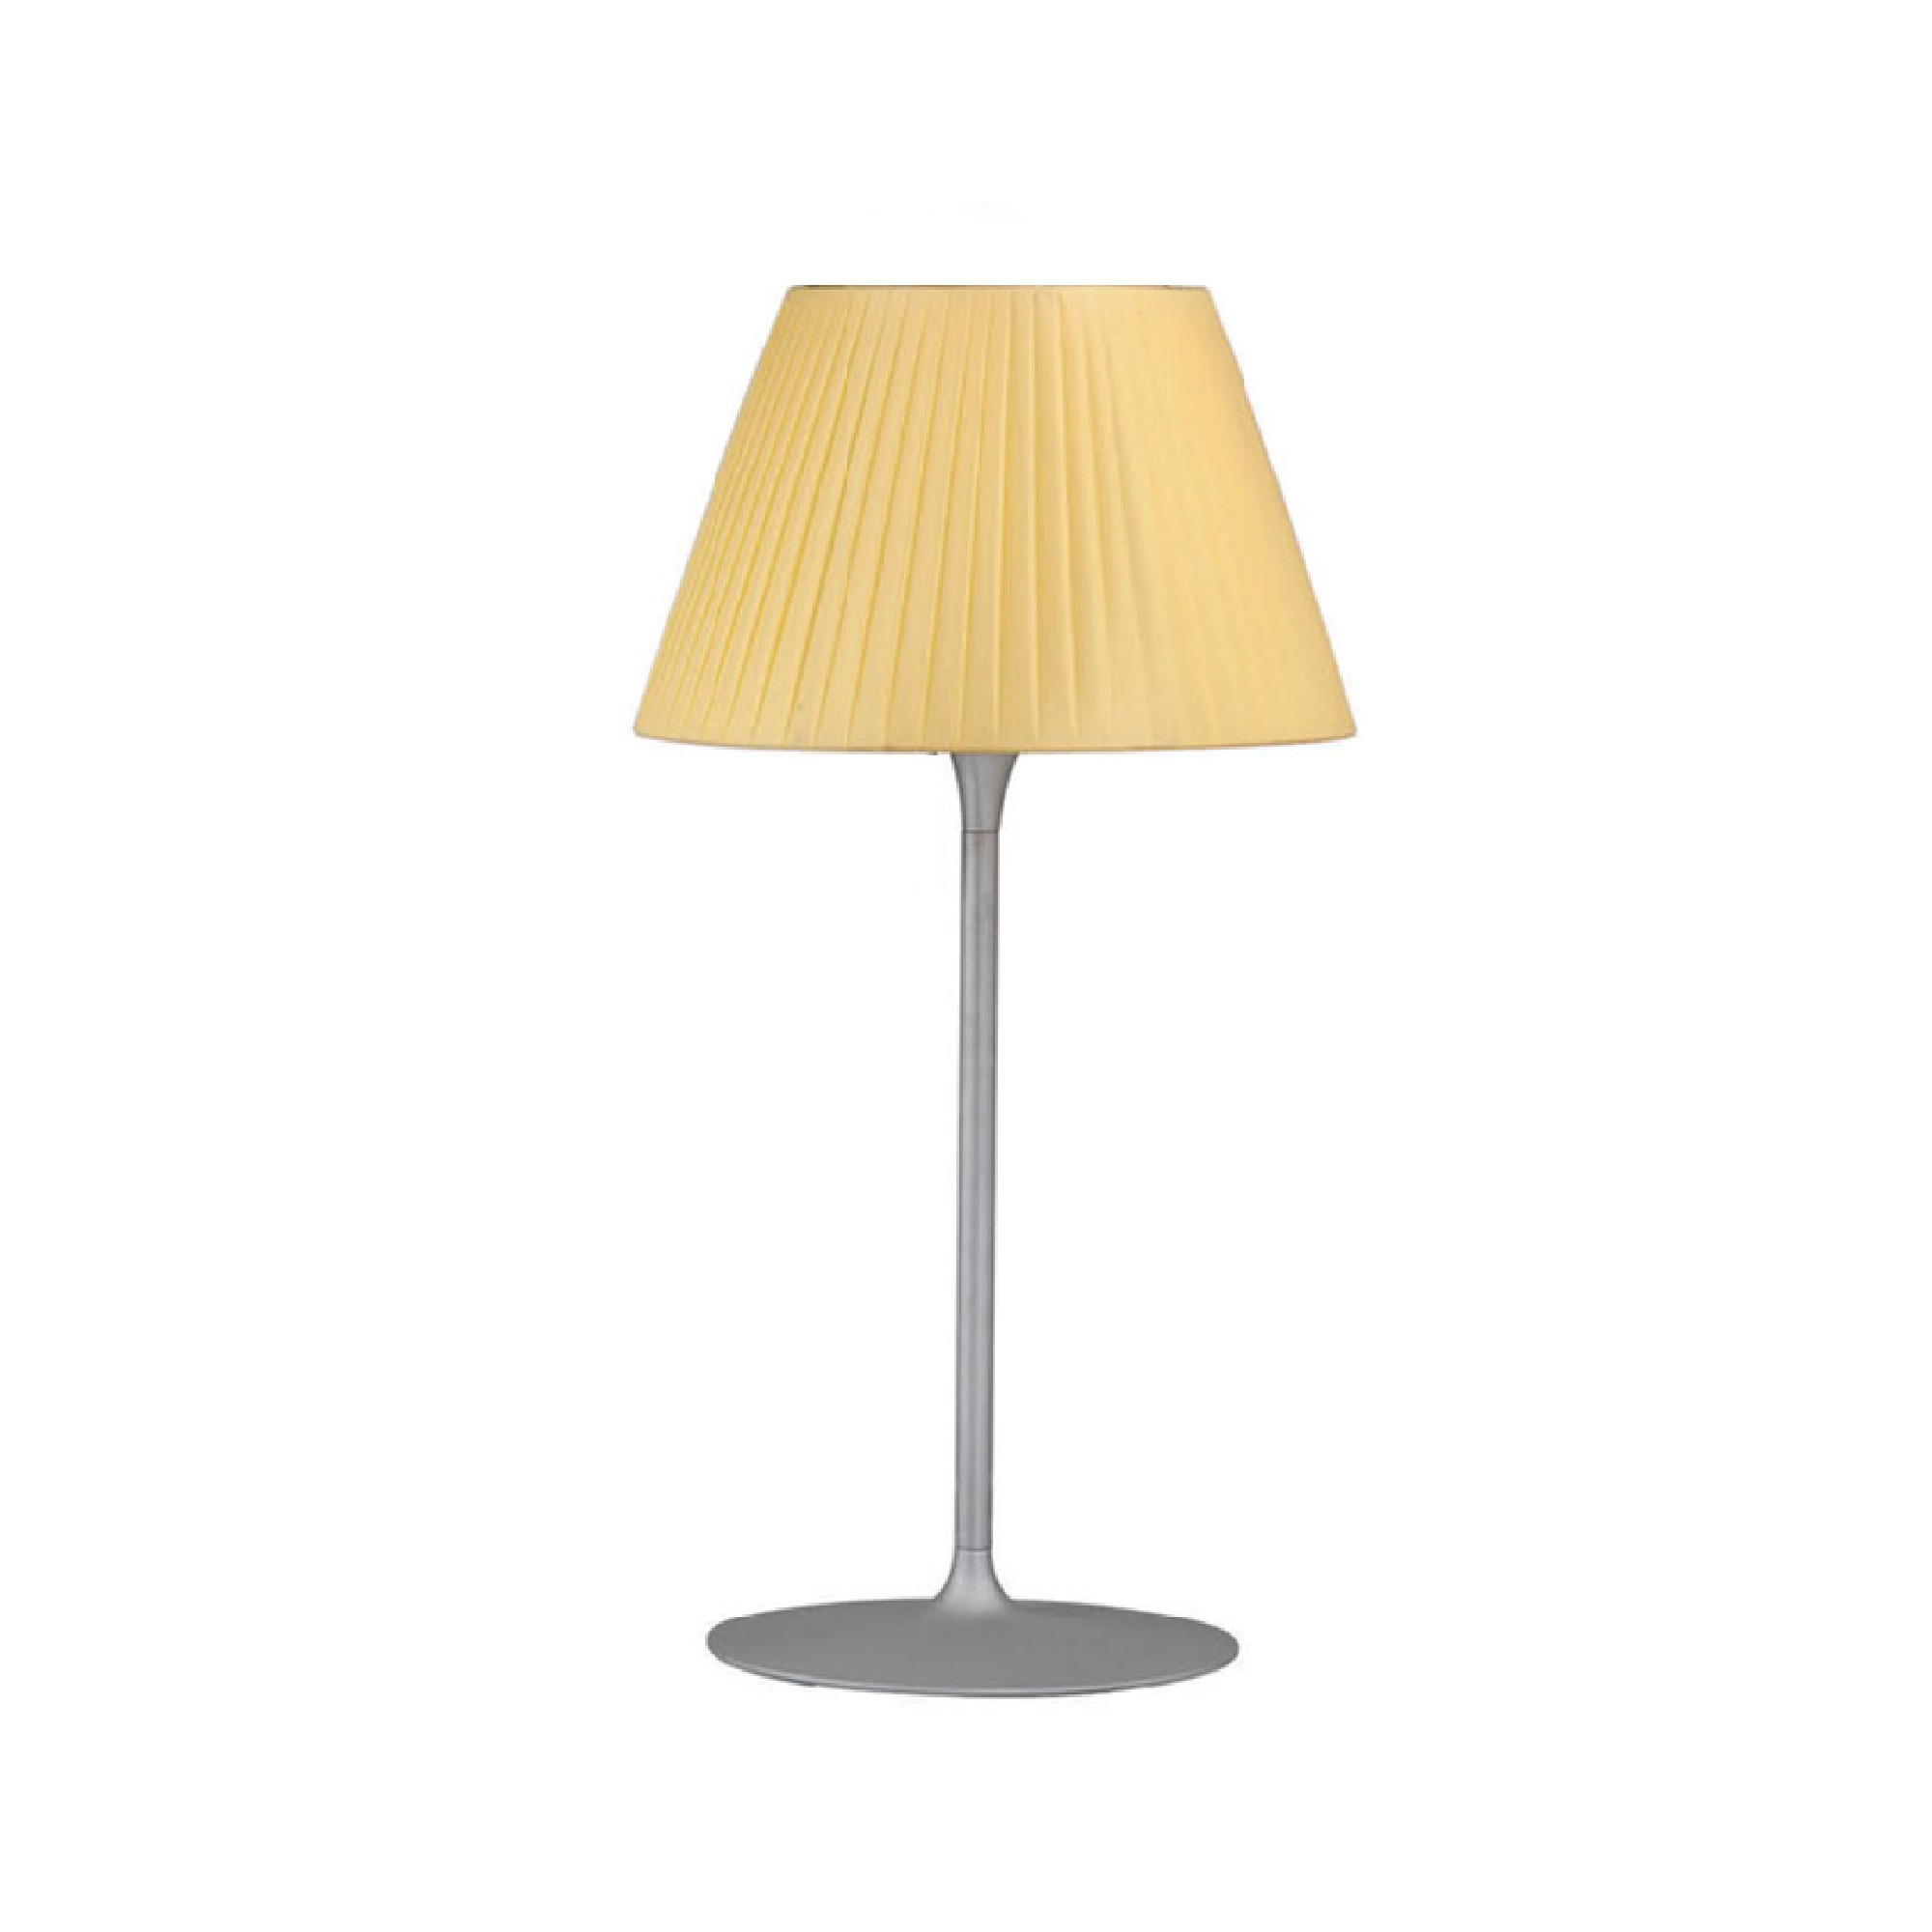 Home Goods Table Lamp DT038-1.Item No.DT038              2.Home Goods Table Lamp DT038             3.Simple Desigh          4.Top quality,original design            5.Good price,prompt delivery               6.StrictQC